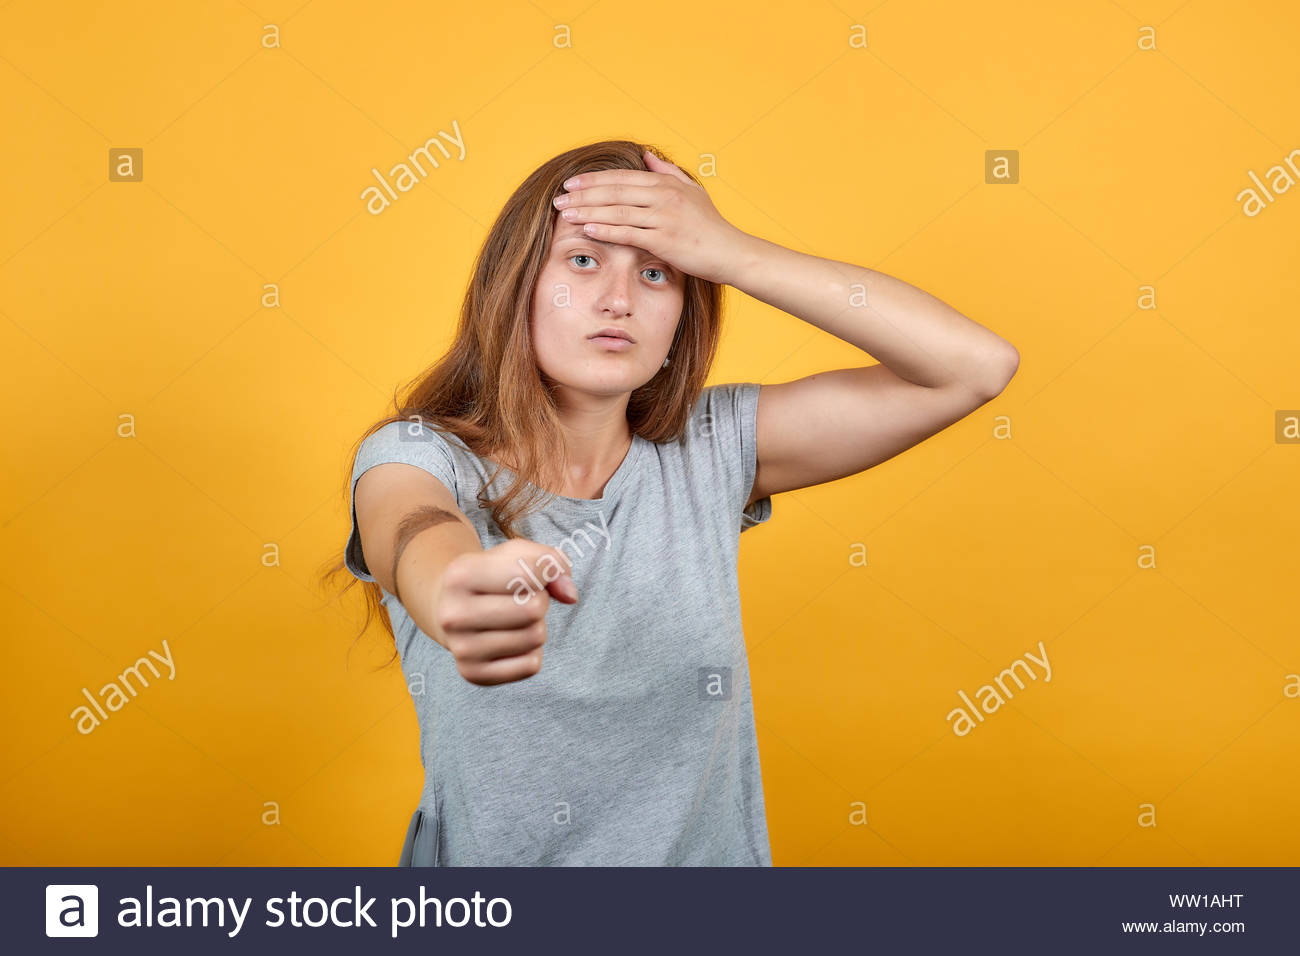 Brute Girl In Gray T Shirt Over Isolated Orange Background